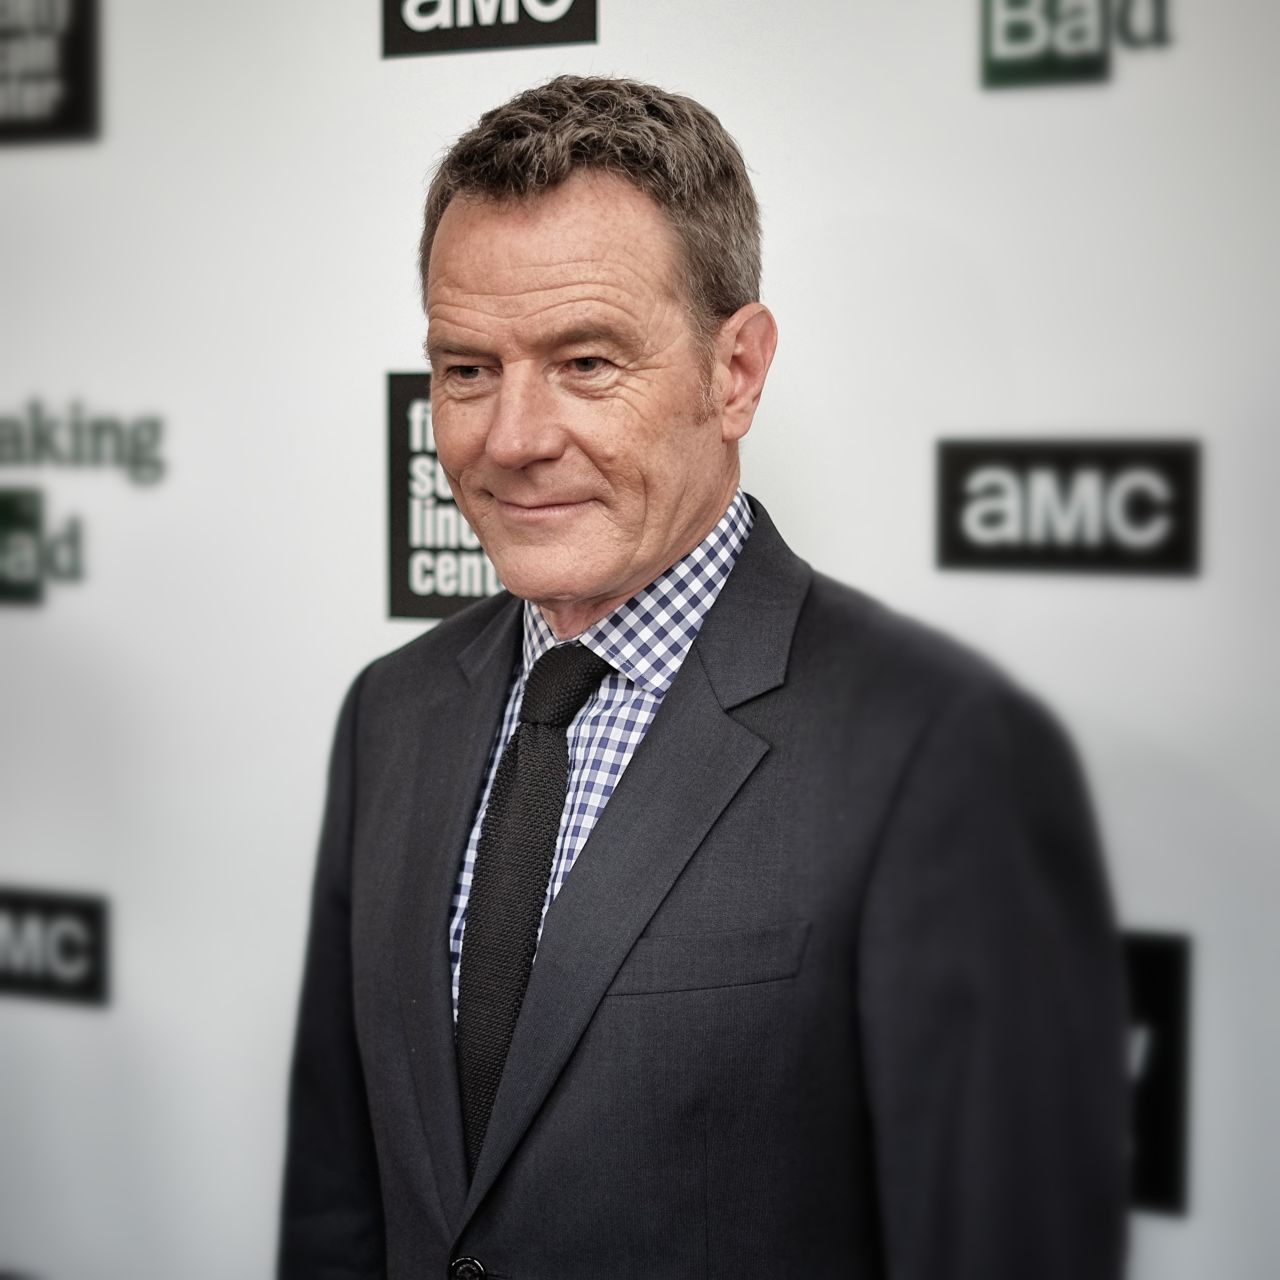 Bryan Cranston has had a slow but steady rise to stardom. Here are some of the stops along the way to "Breaking Bad's" Walter White.